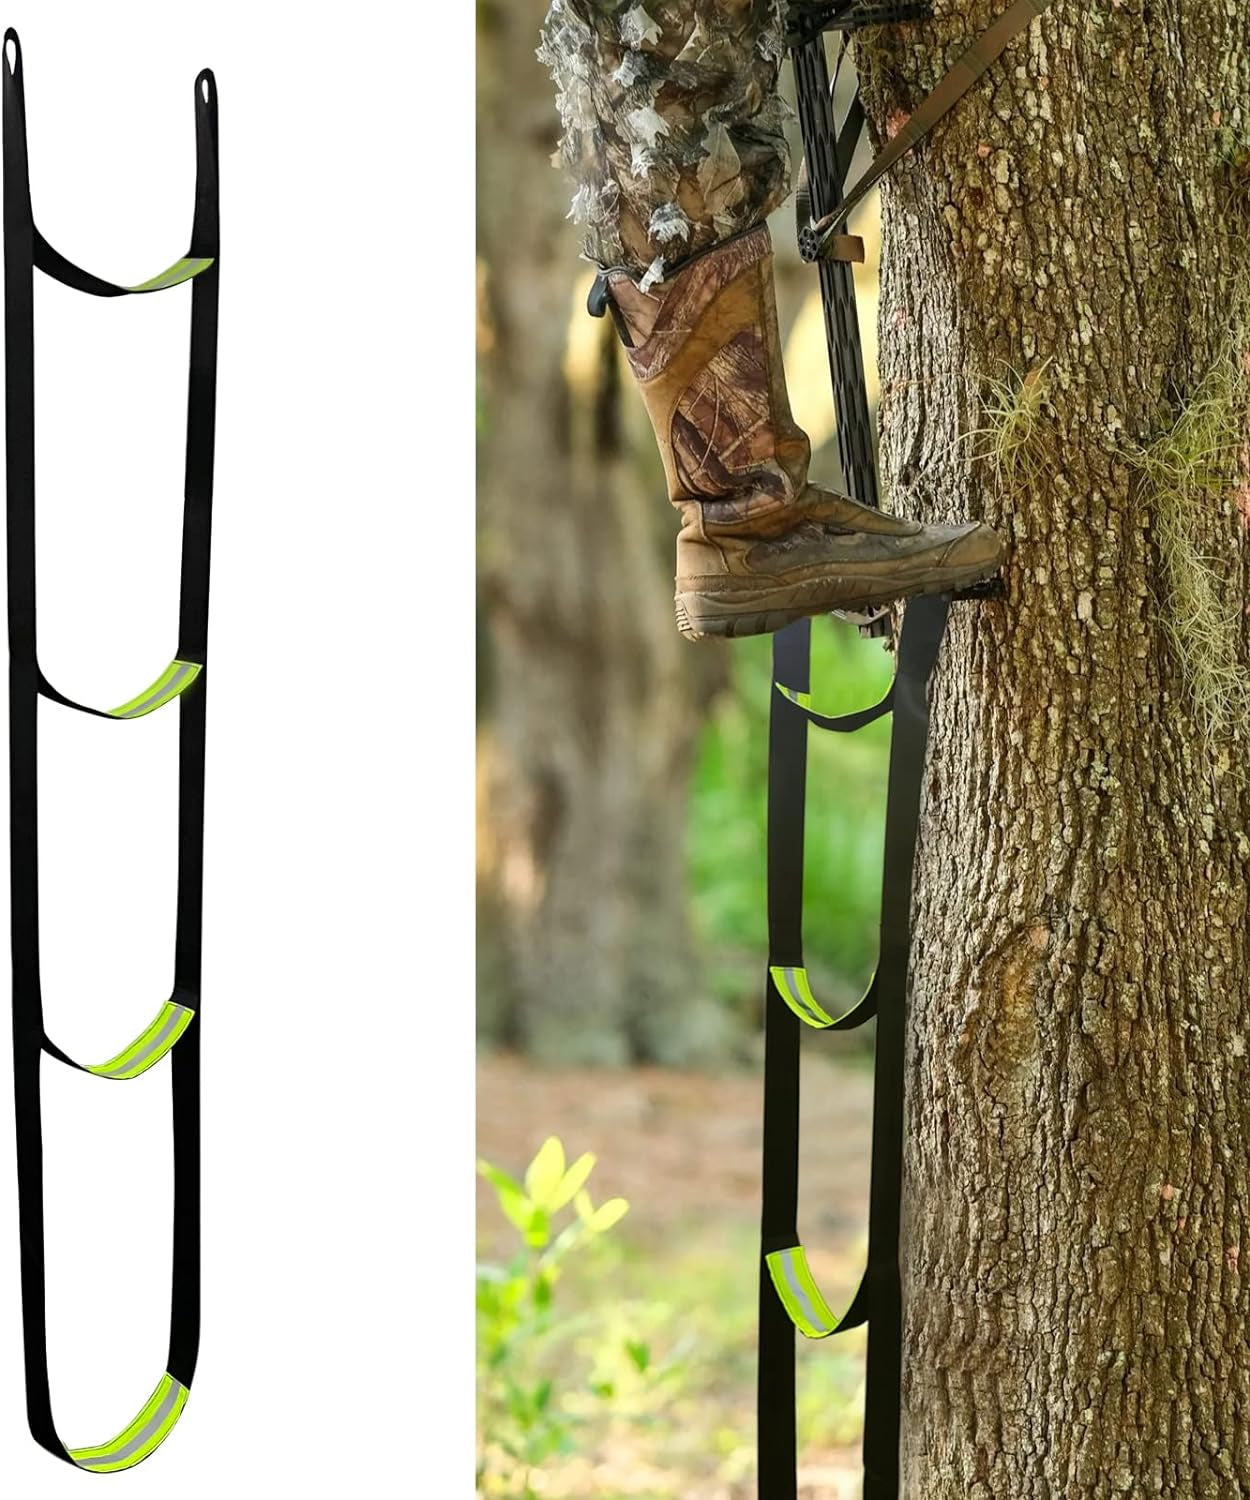 Spring 3 Step Climbing Aider for Hunting, Climbing Stick 